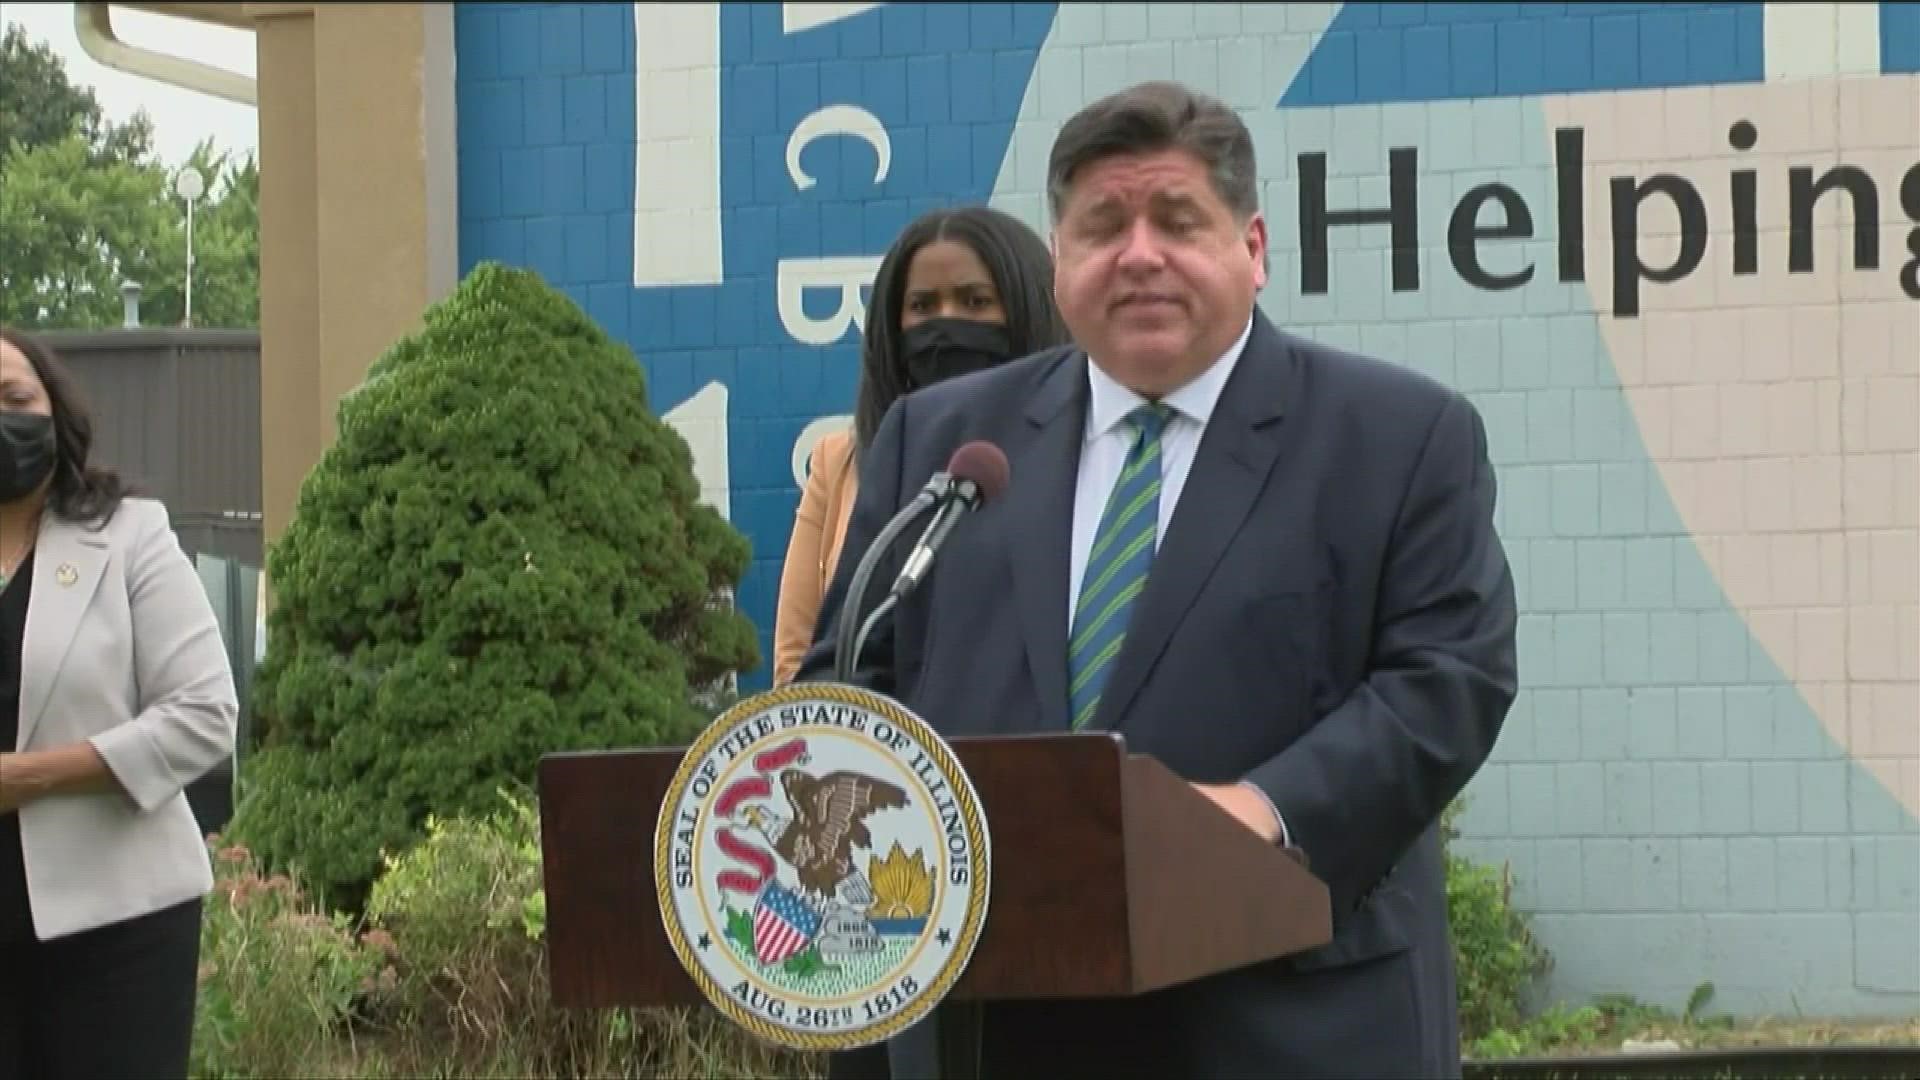 Gov. Pritzker announced Monday an increase in funding to LIHEAP, a program that provides residents assistance with costs of rent, utilities, food and water.